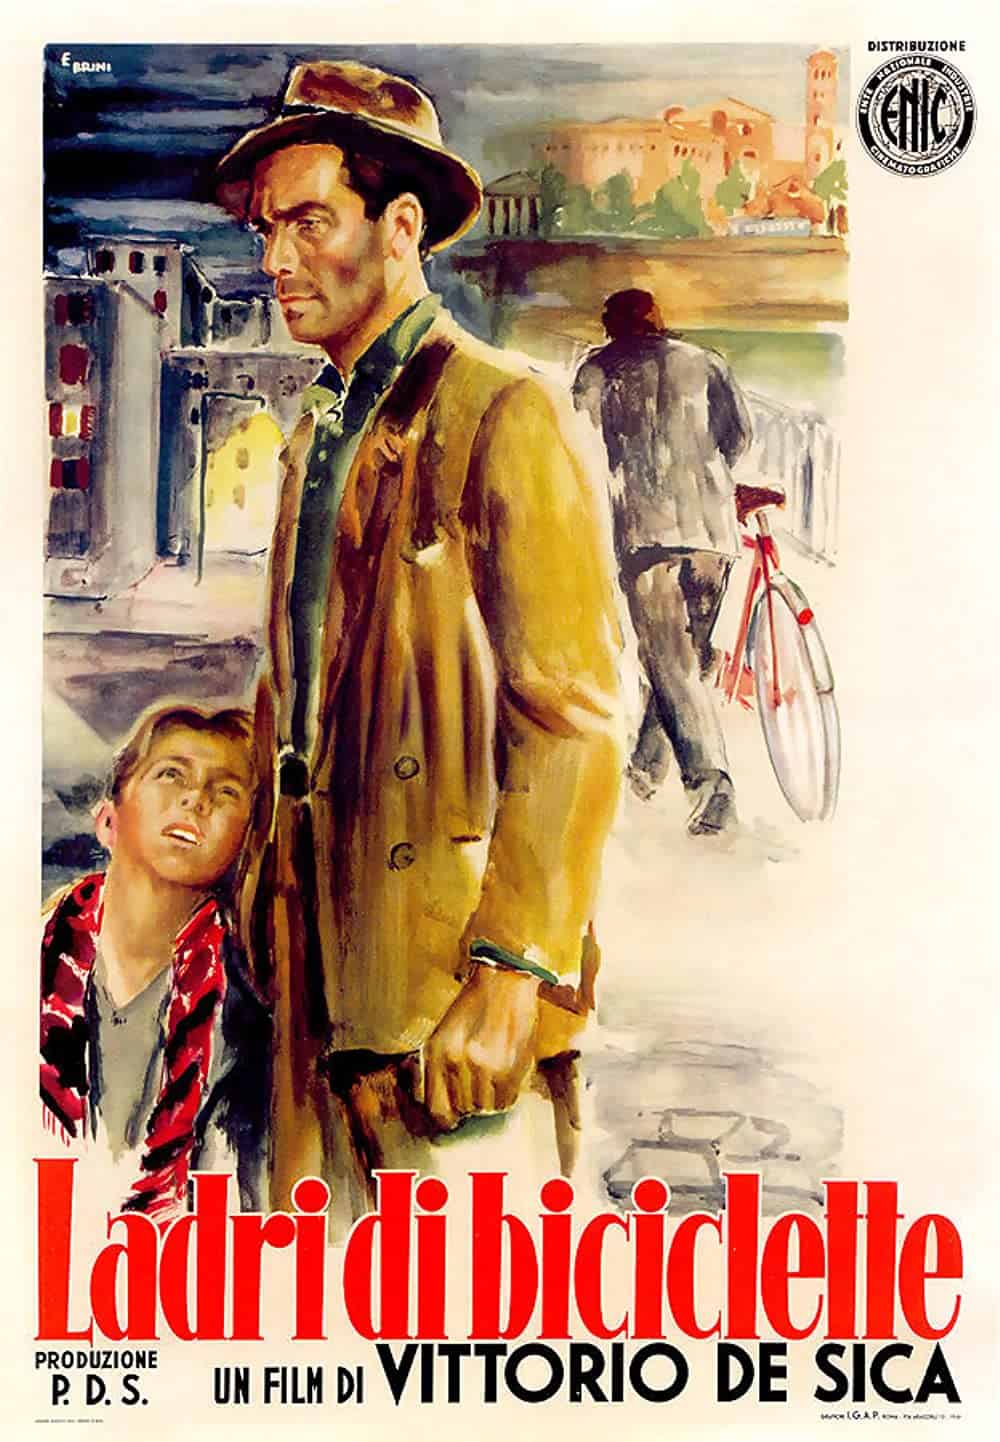 Bicycle Thieves (1948) Best Movies About Rome to Watch and Re-Watch